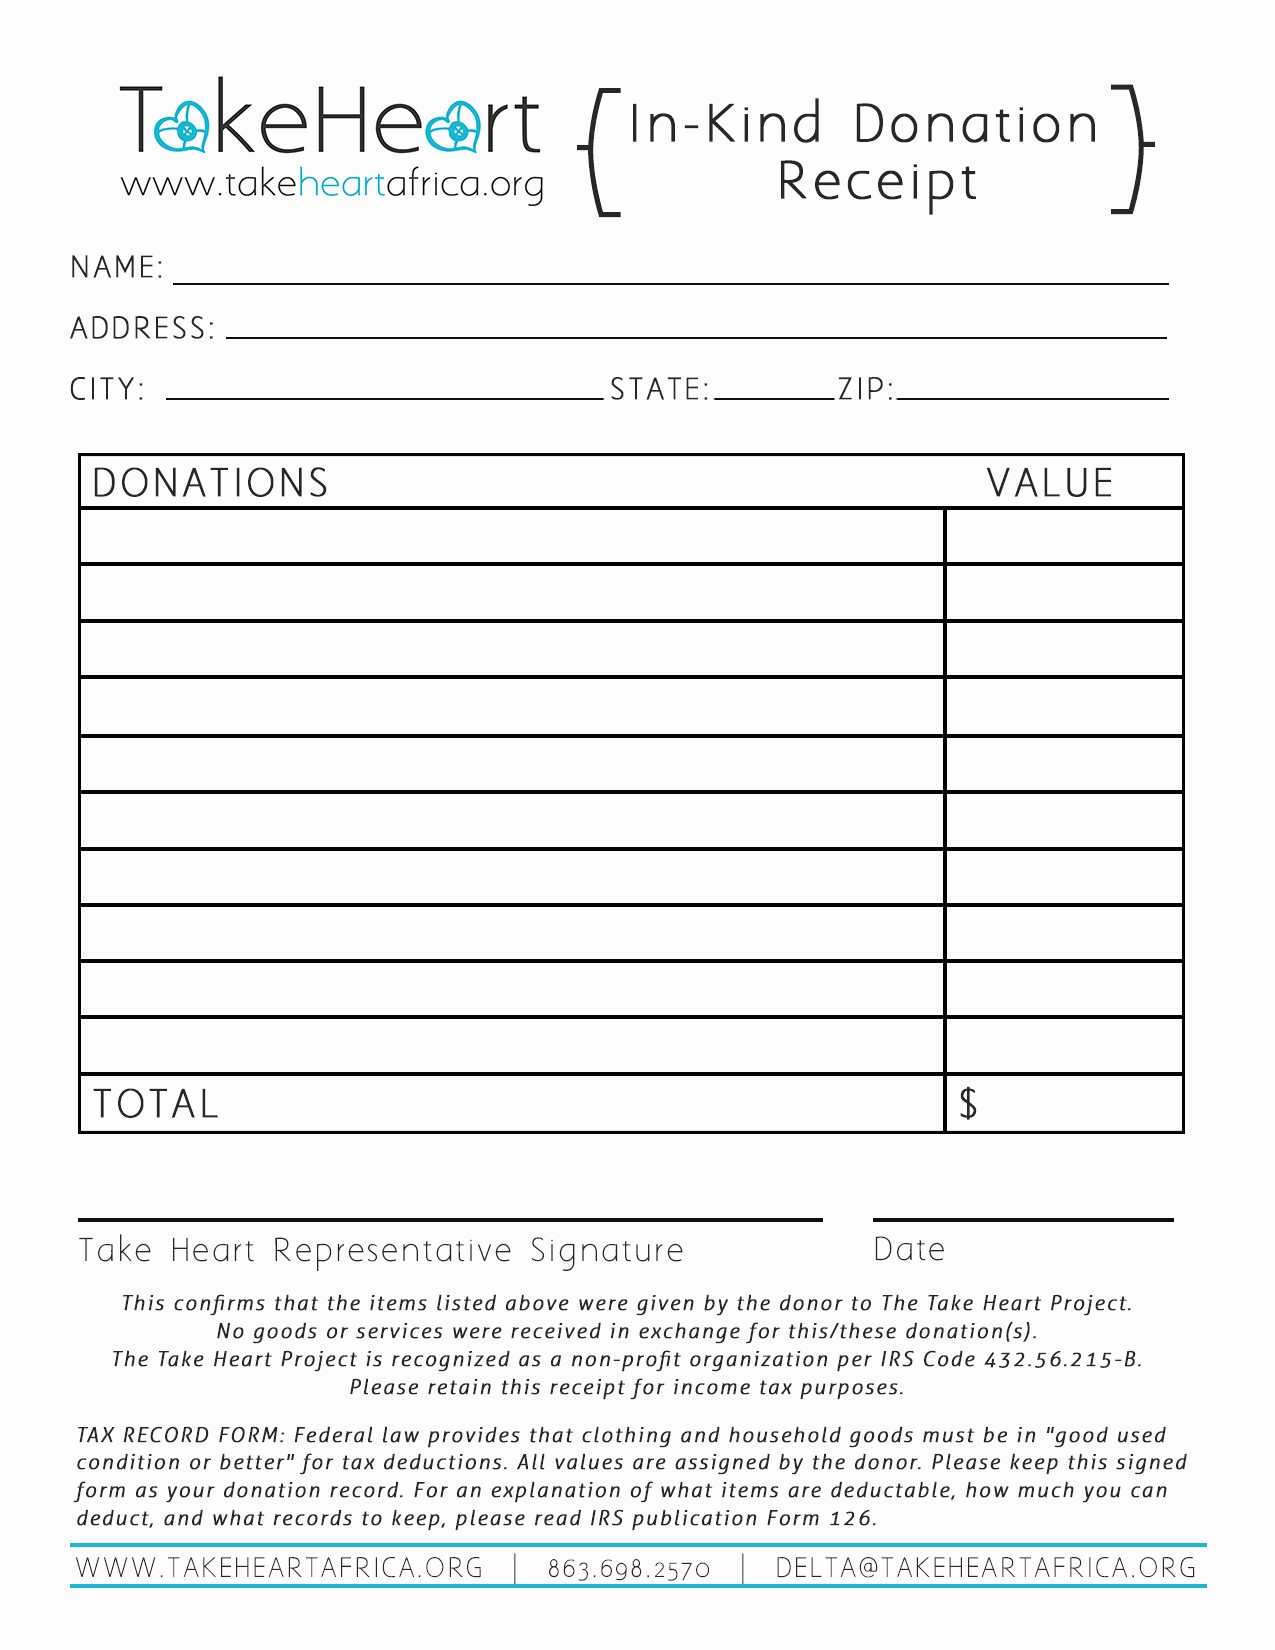 Receipt for Tax Deductible Donation Inspirational Template Donation Receipt Template